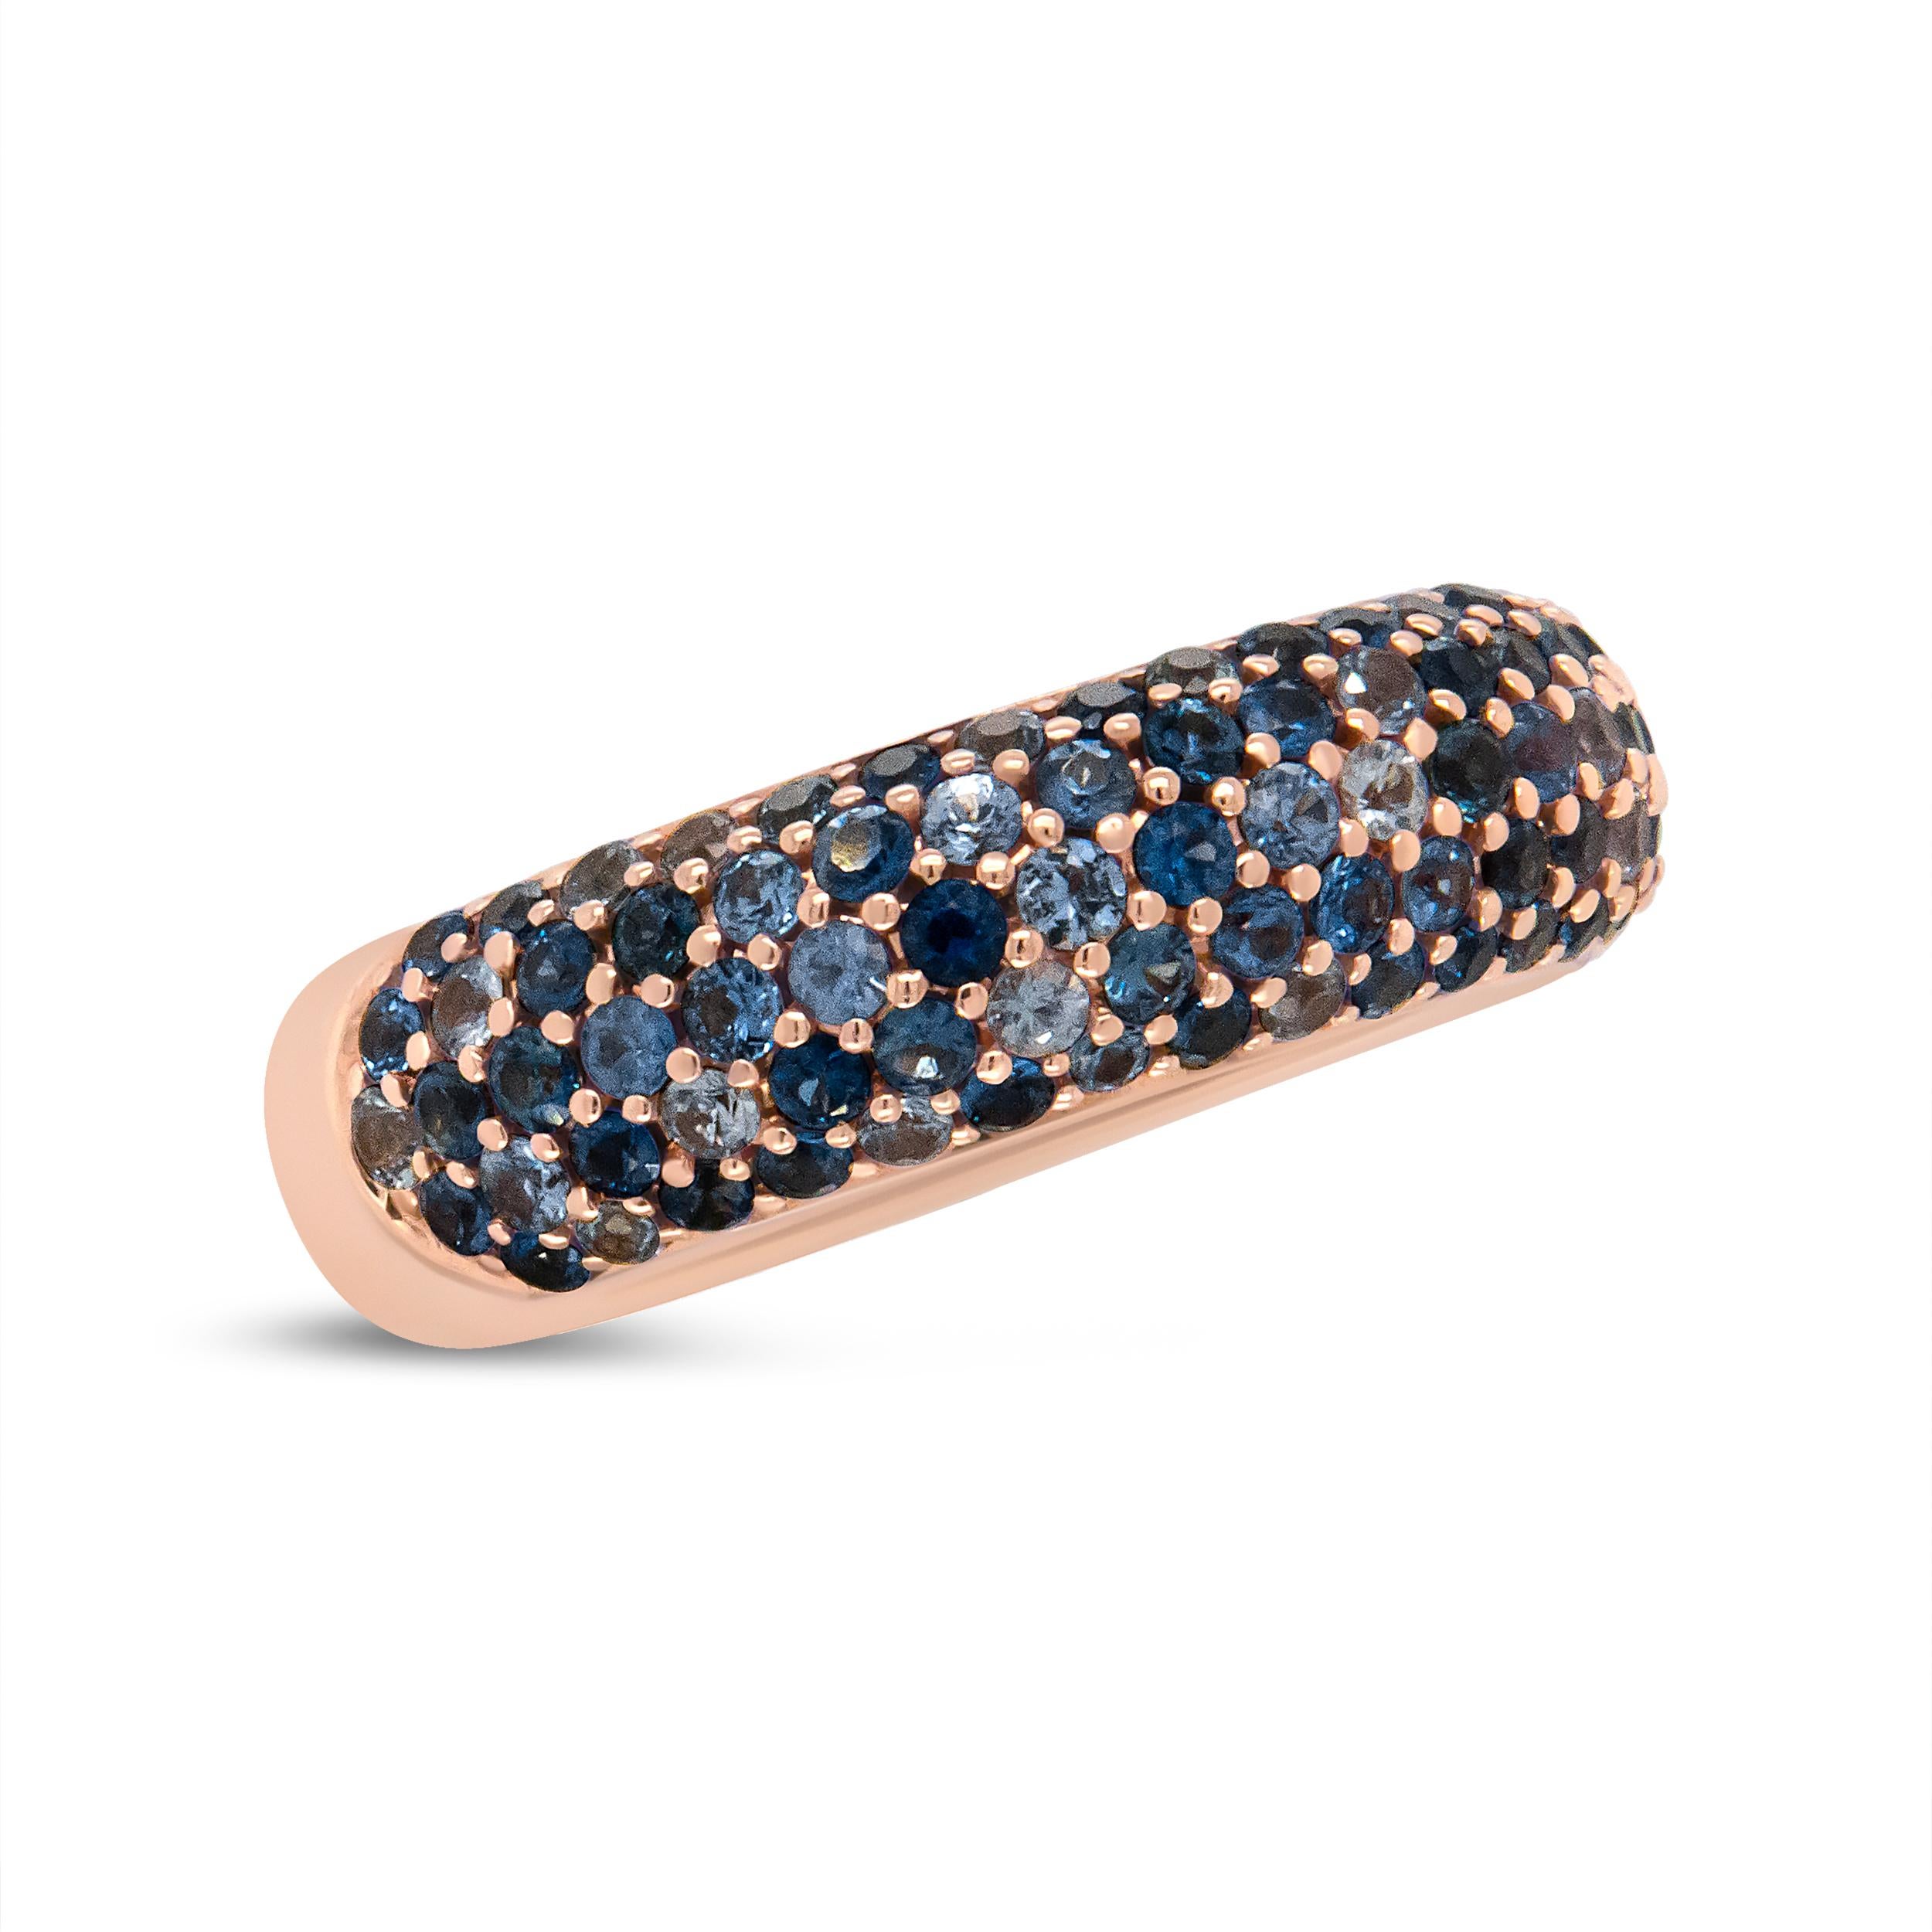 A glamorous piece reminiscent of the ocean, this rose gold band is embellished with stunning sapphires of different calibers of blue tones. The shaded blue gemstones are embellished on luxurious 18k rose gold for an overall striking and glamorous